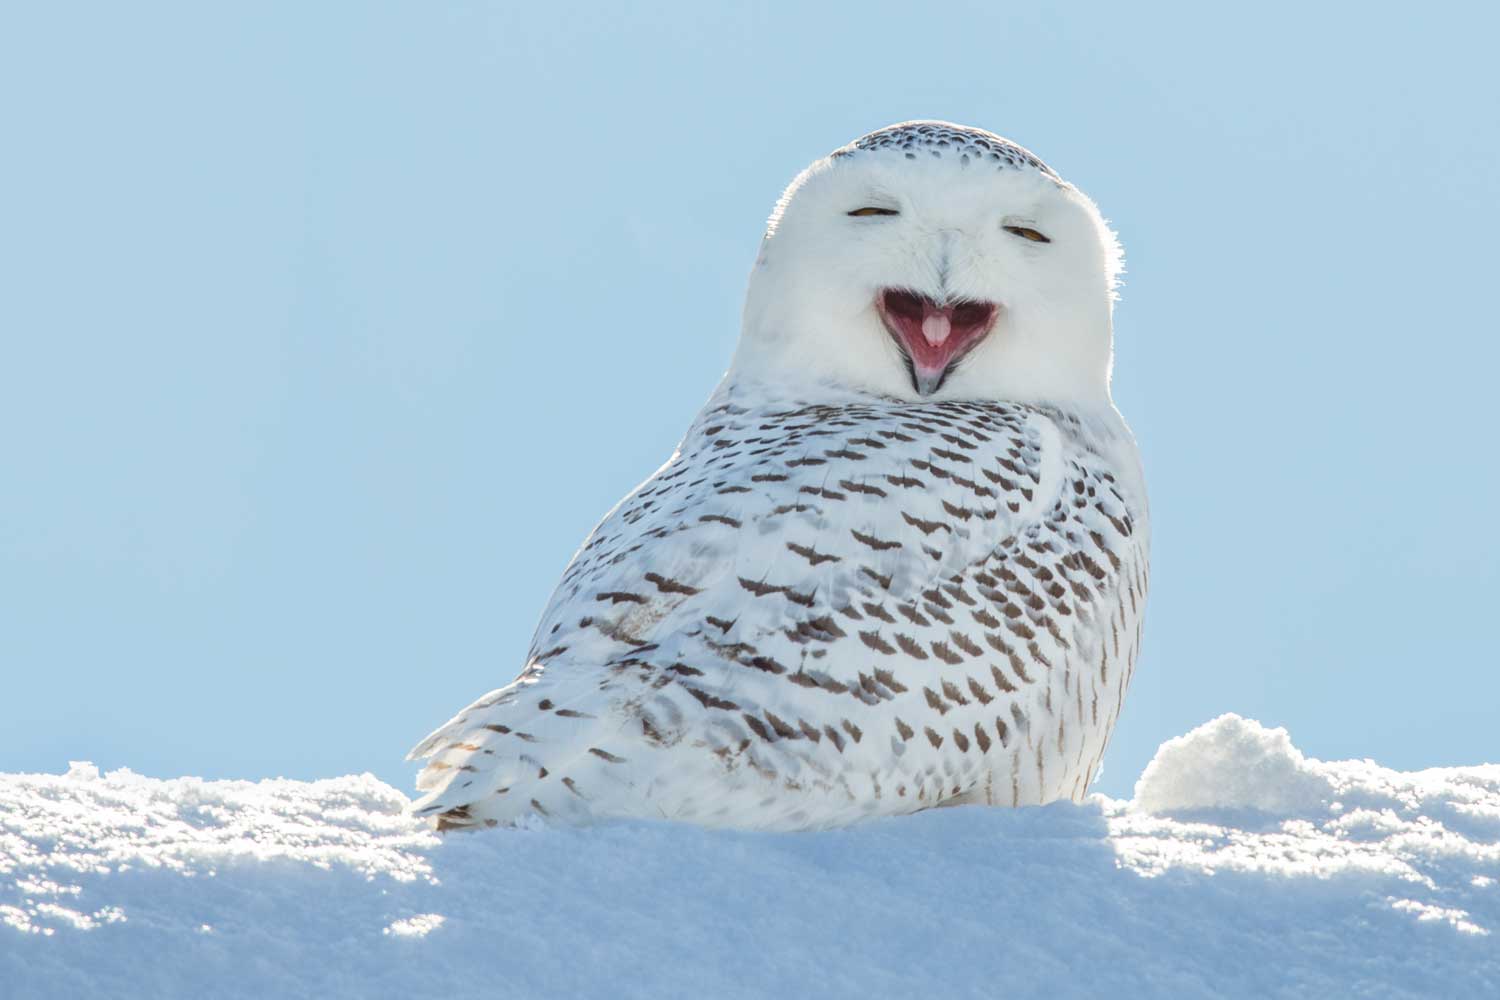 Snowy owl squinting with its mouth open.